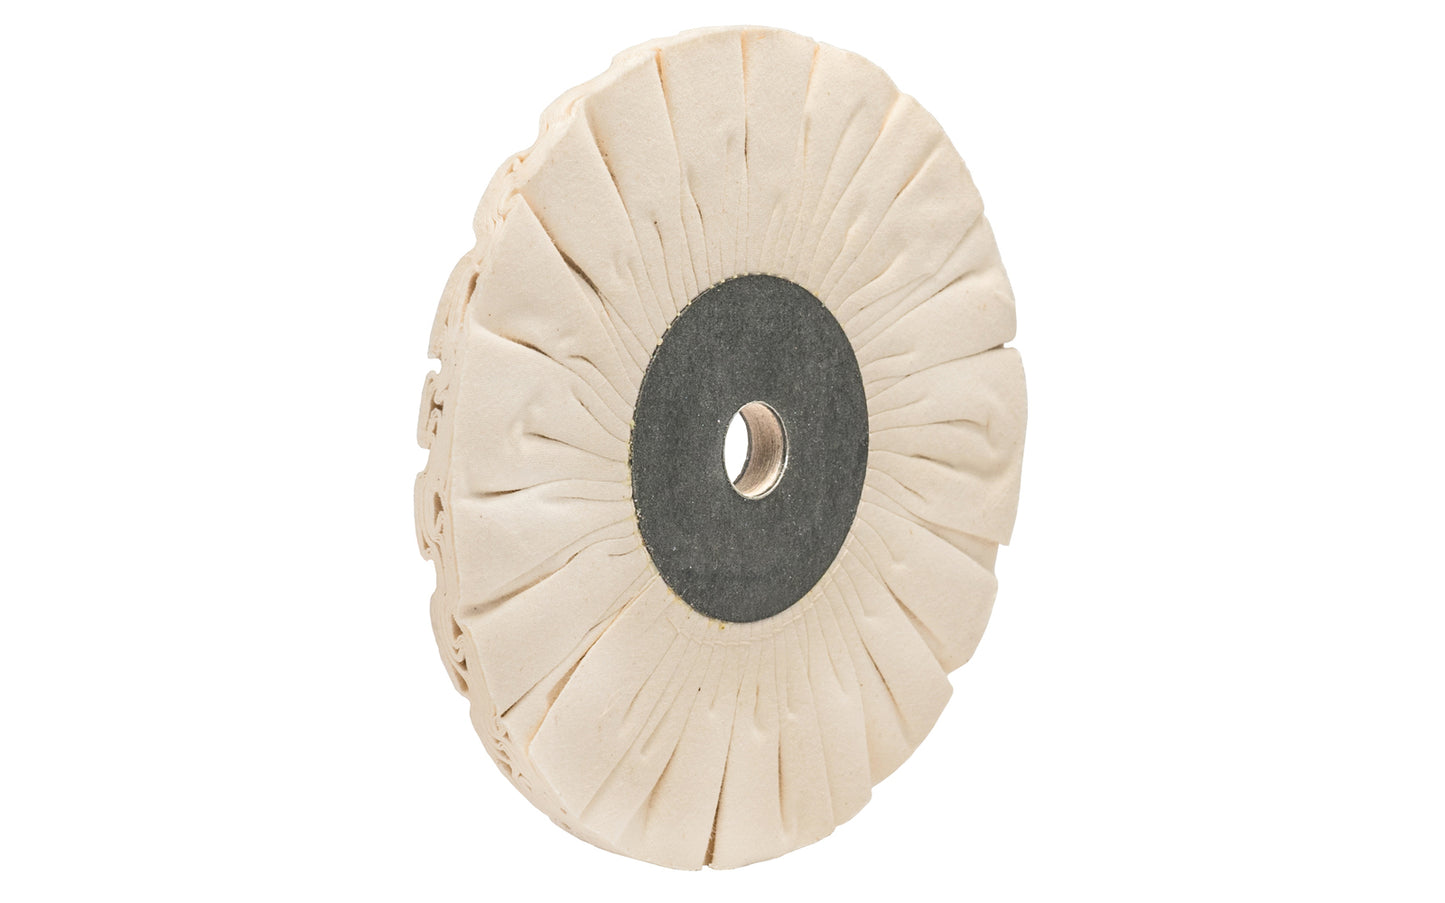 The 6" "Fray-Rite" Bias Cloth Buffing Wheel ~ 1/2" Thick has 5/8" hole diameter, 1/2" wide thickness and 6" diameter of wheel. Made in USA. Dico Polishing Company 528-164